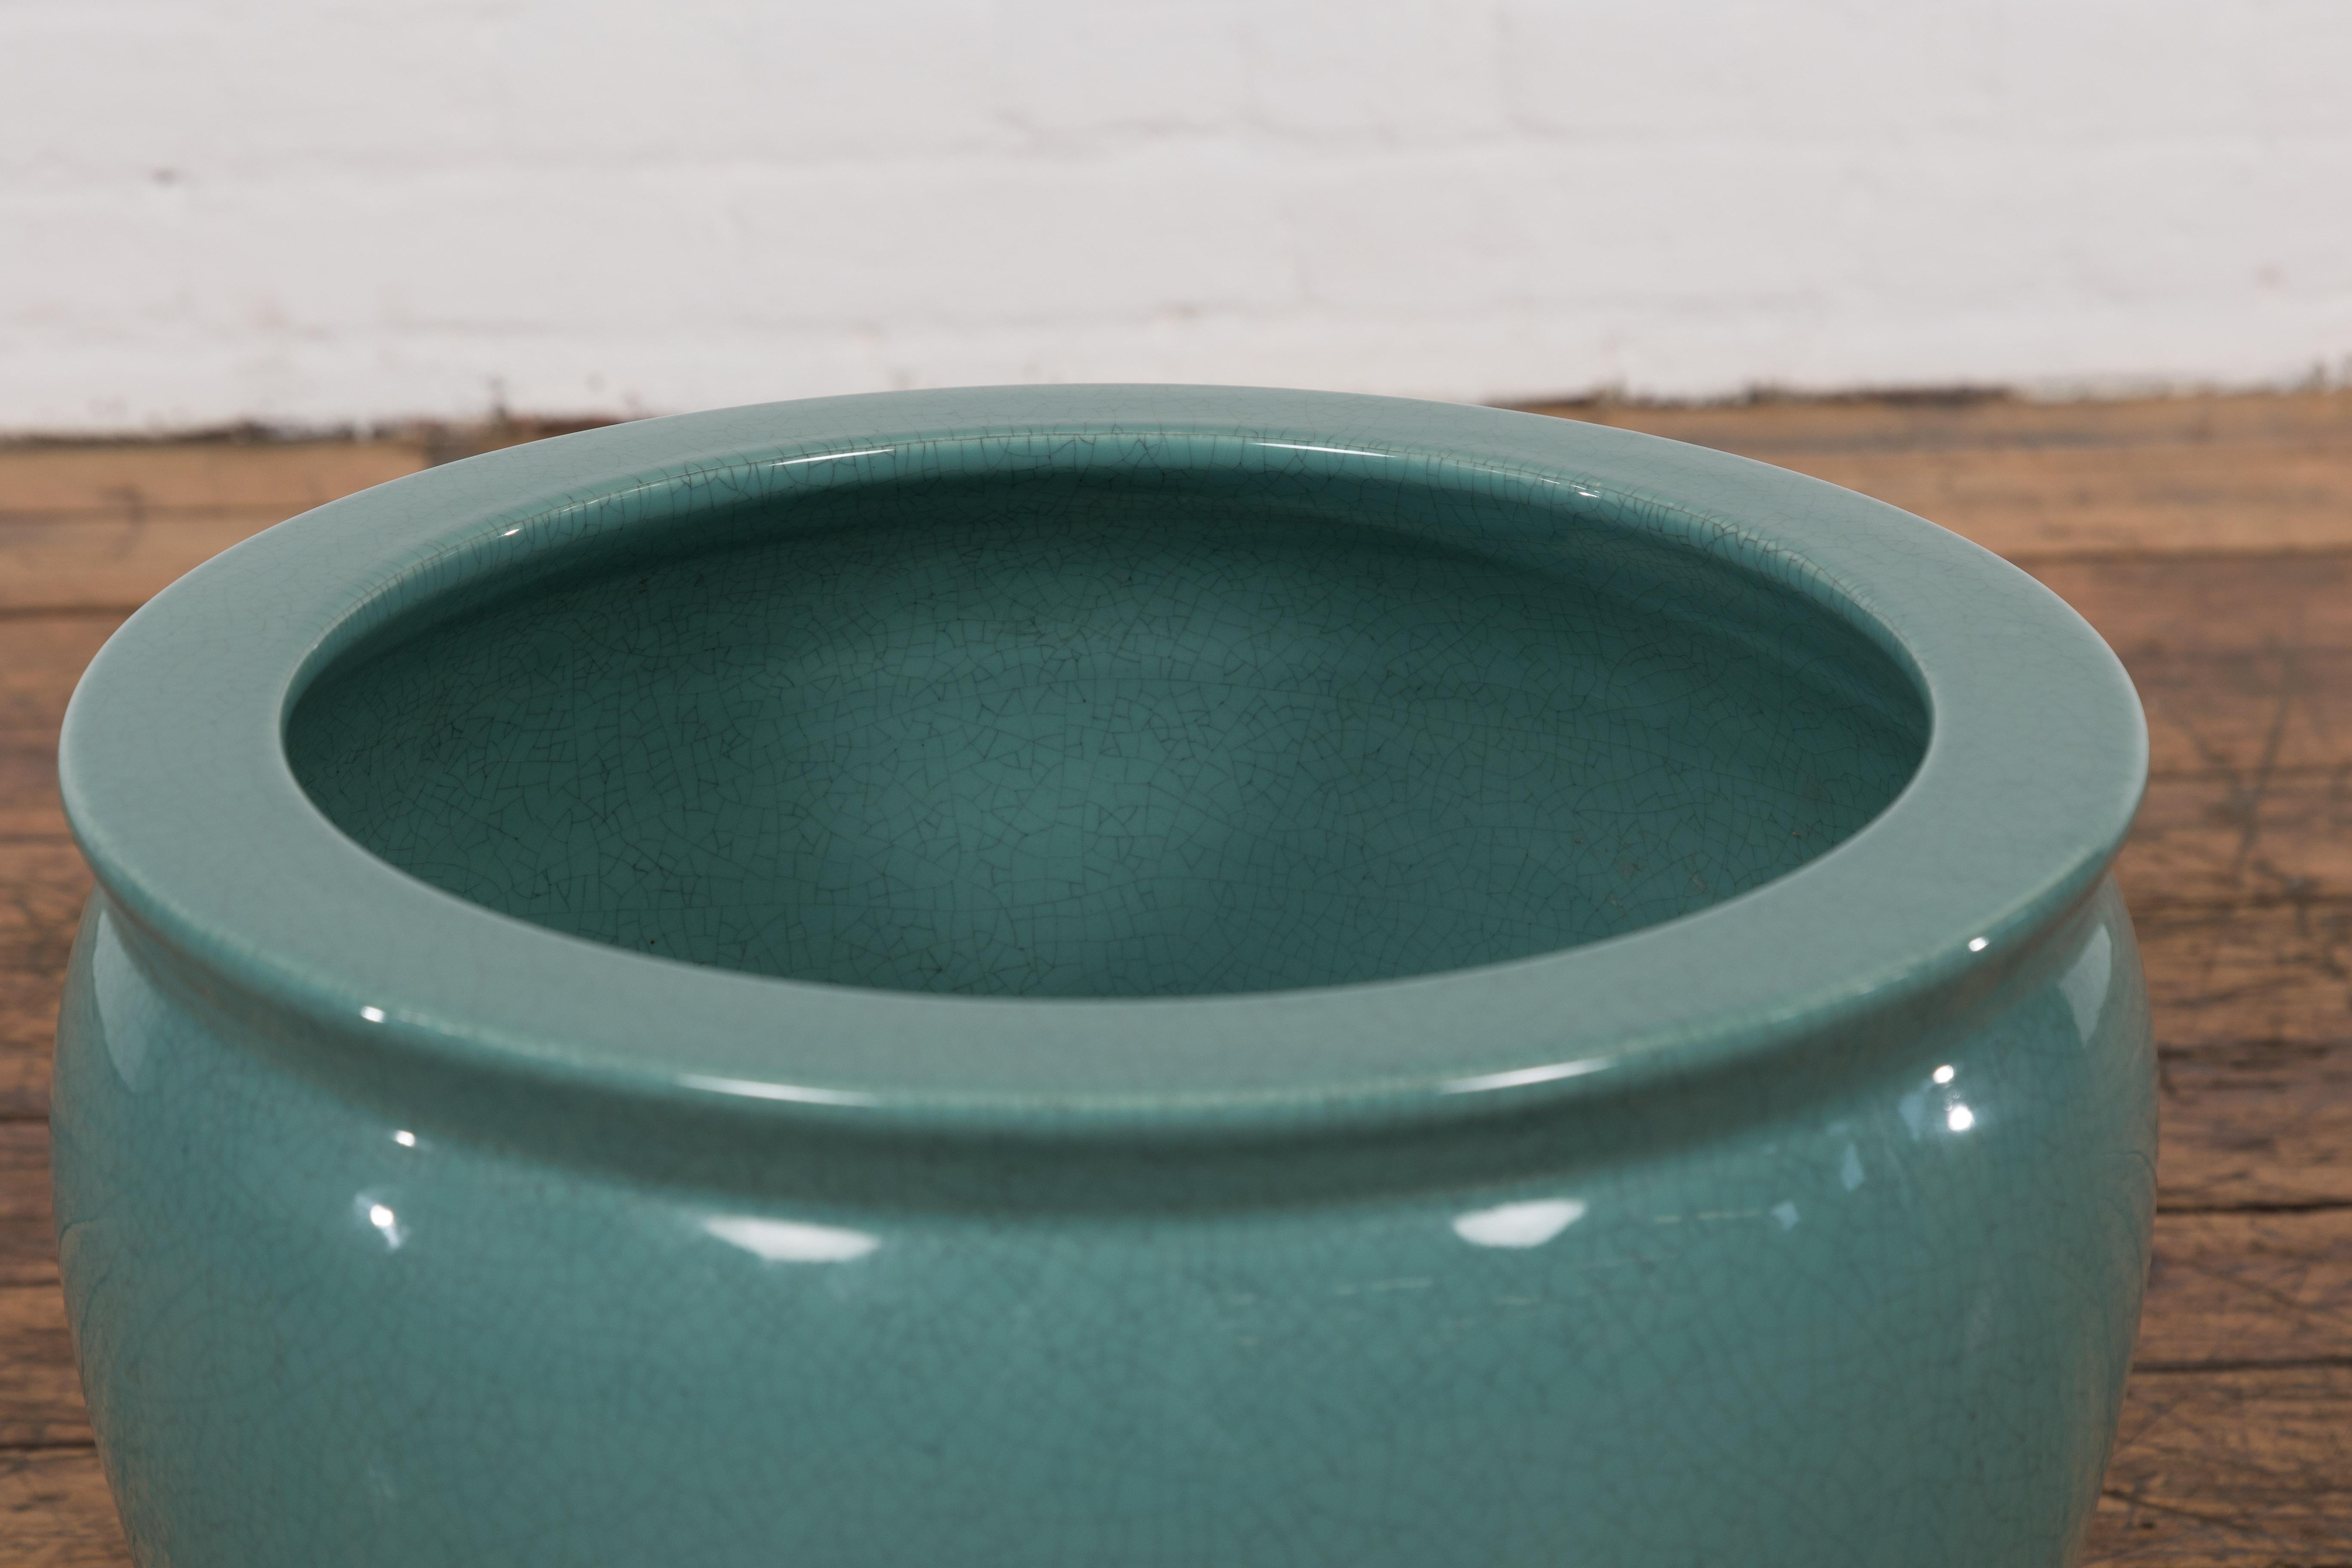 Midcentury Teal Garden Planter with Circular Opening and Tapering Lines In Good Condition For Sale In Yonkers, NY